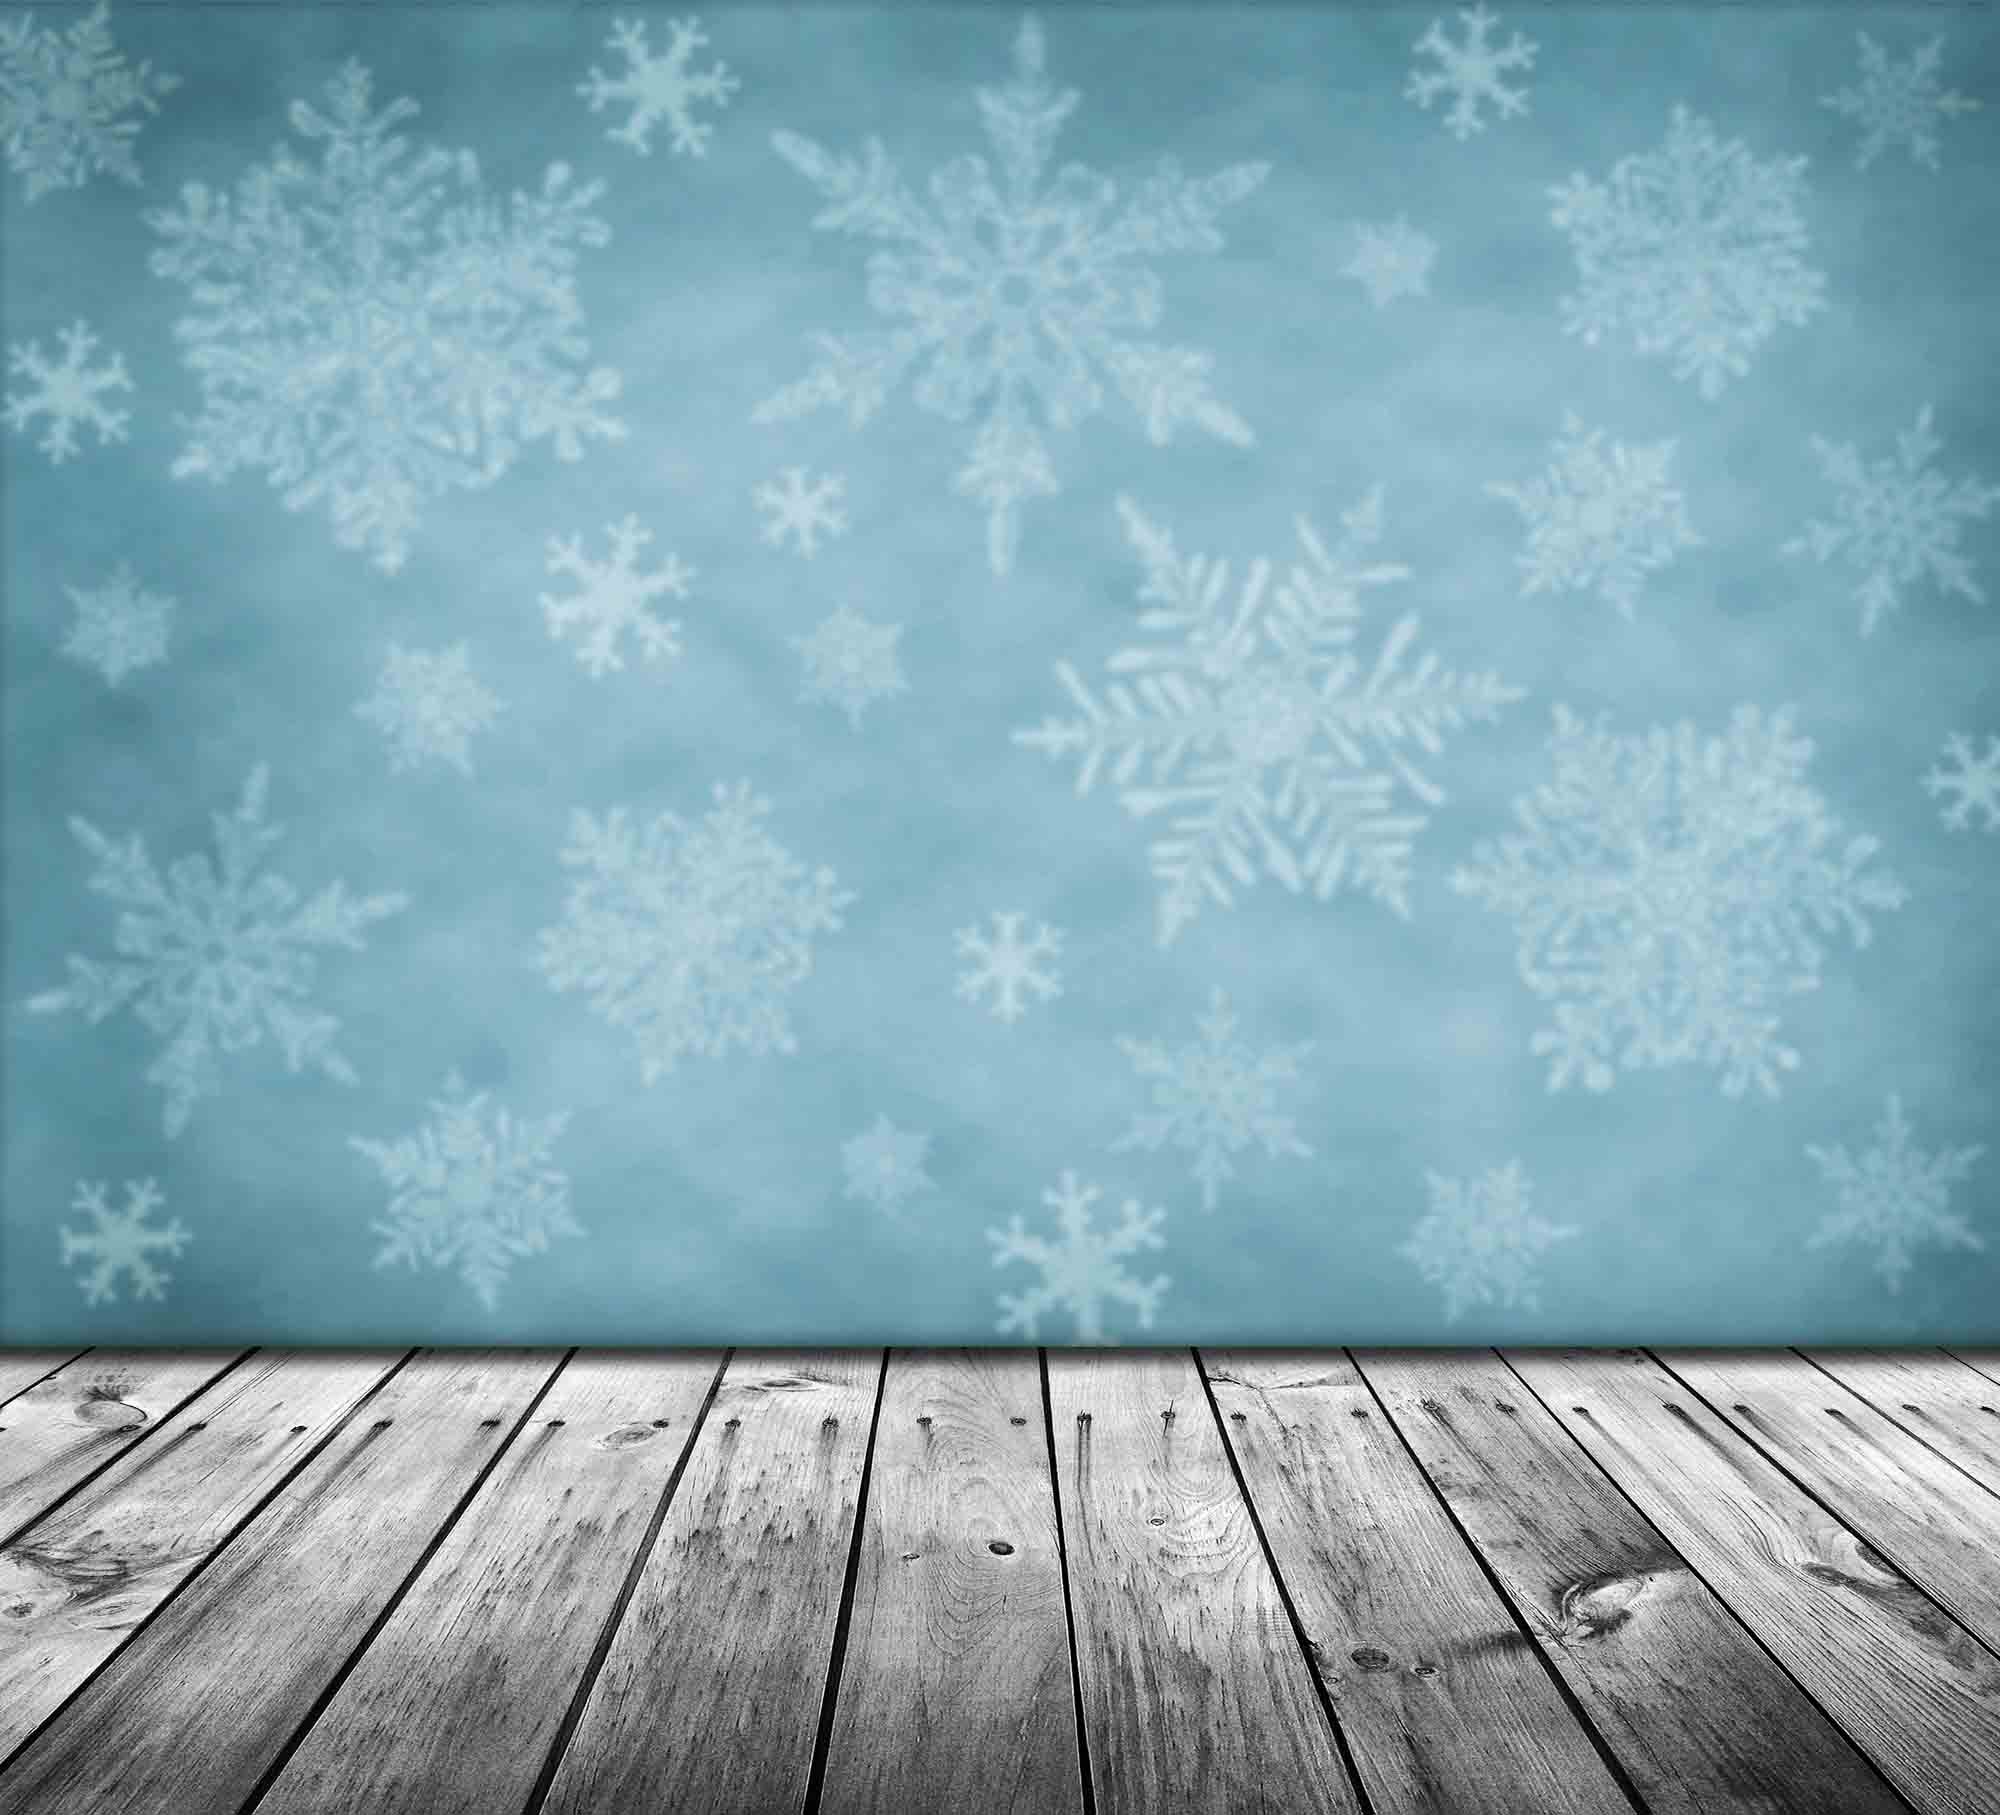 Snow Printed On Pale Blue Wall With Retro Wood Floor Backdrop For Photography Shopbackdrop